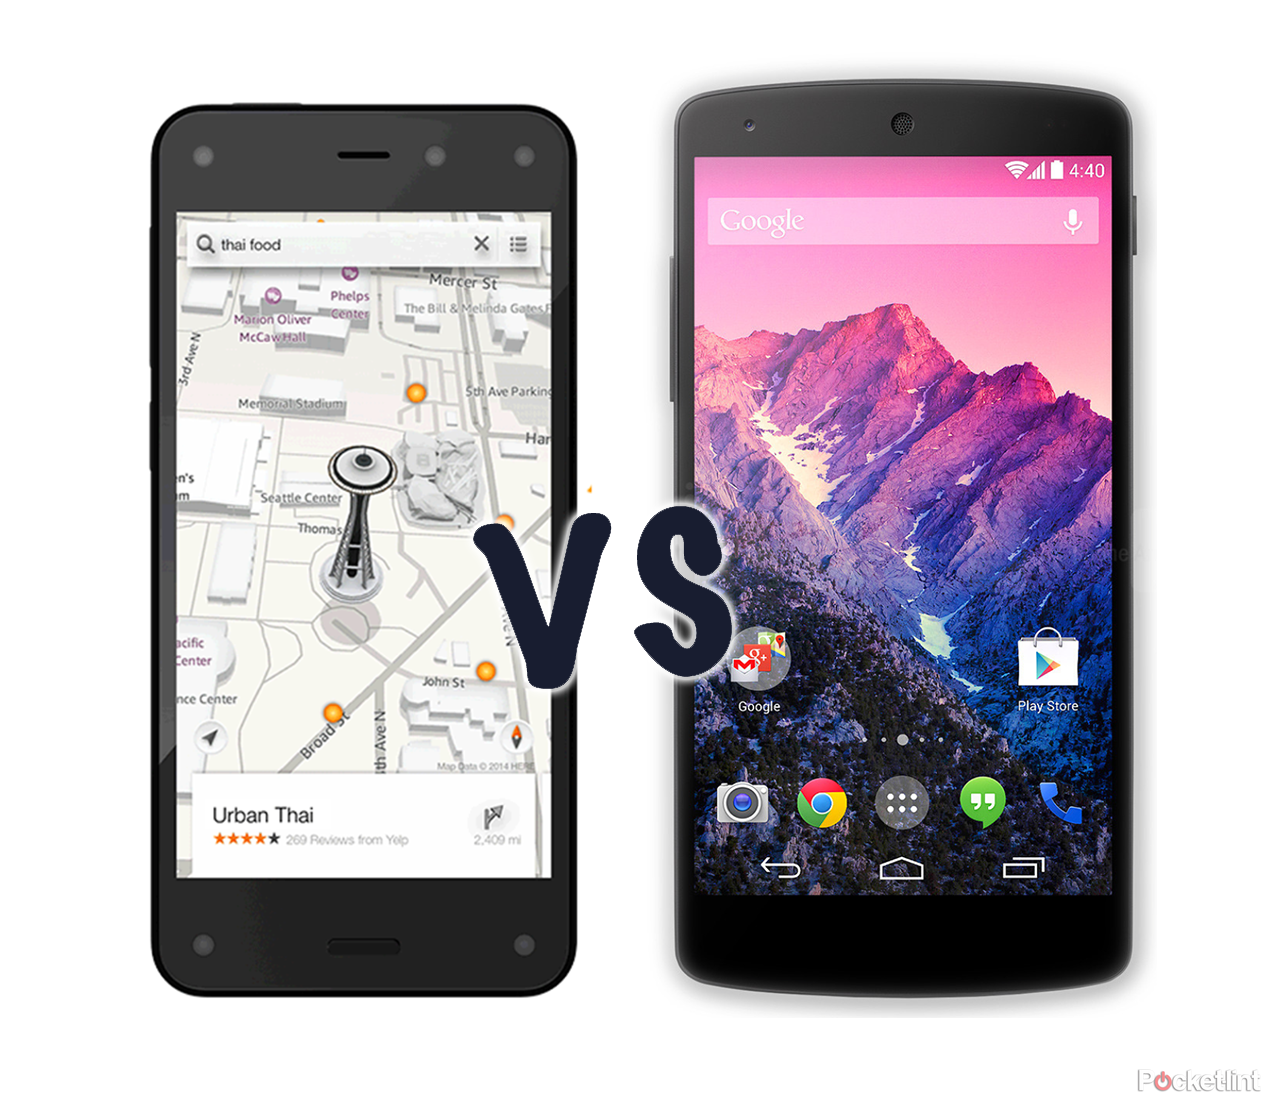 amazon fire phone vs google nexus 5 what s the difference  image 1